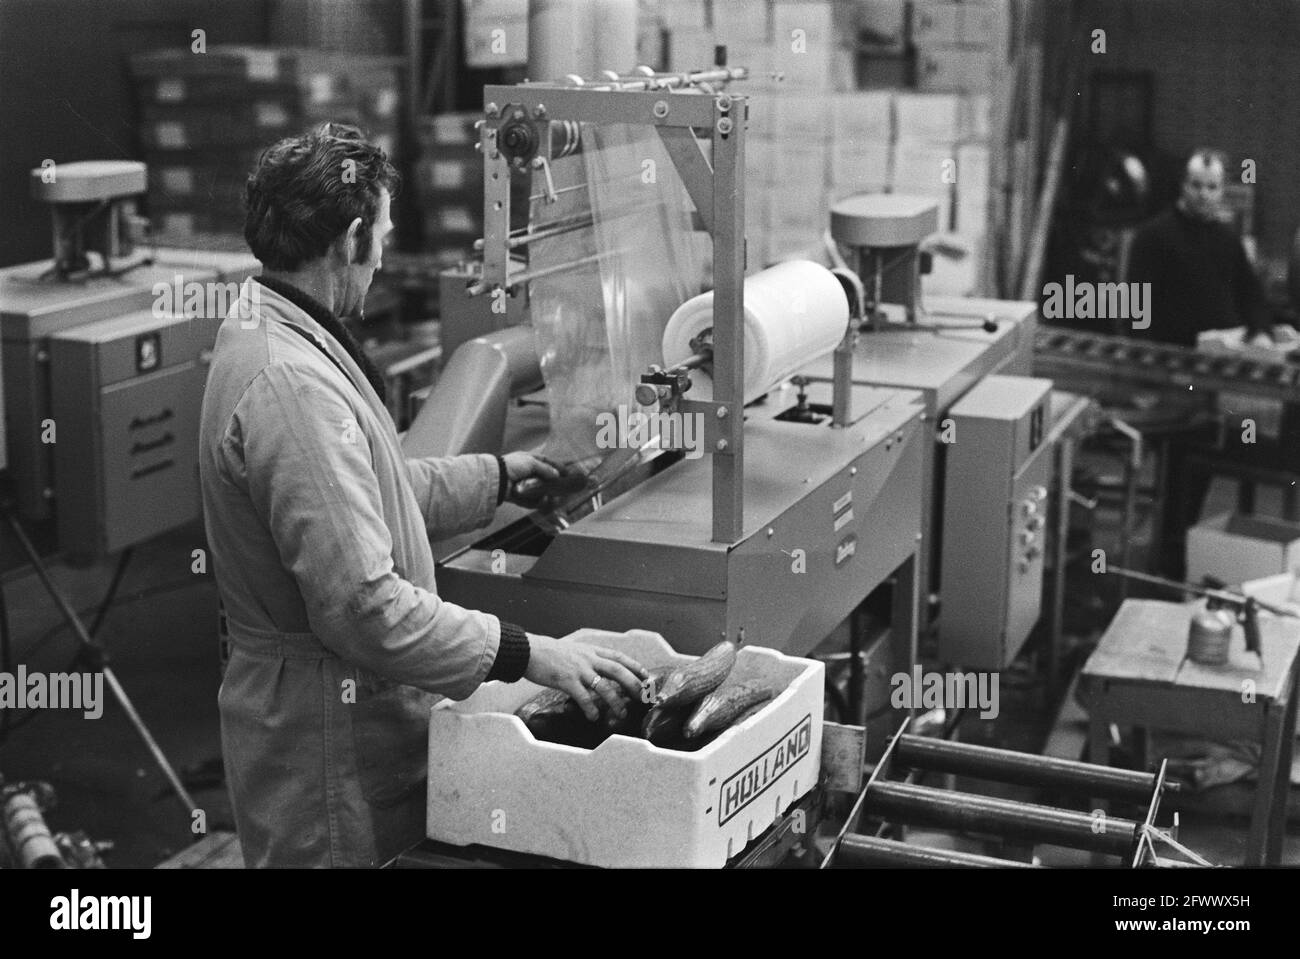 Assignment Van Hulsen in the Westland, November 10, 1970, The Netherlands, 20th century press agency photo, news to remember, documentary, historic photography 1945-1990, visual stories, human history of the Twentieth Century, capturing moments in time Stock Photo